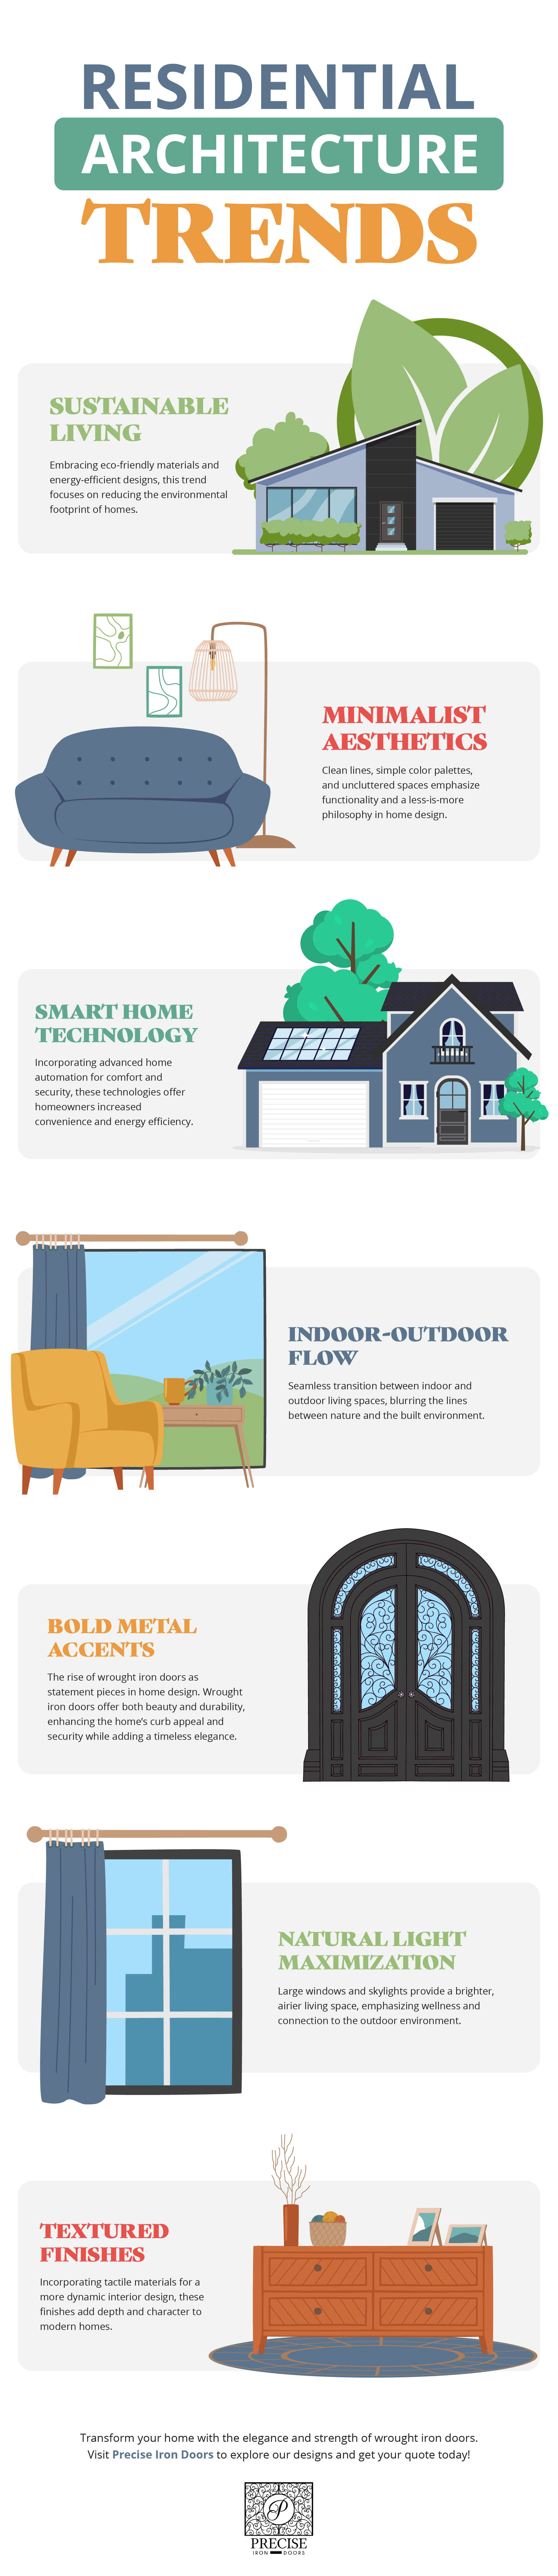 Residential Architecture Trends Infographic